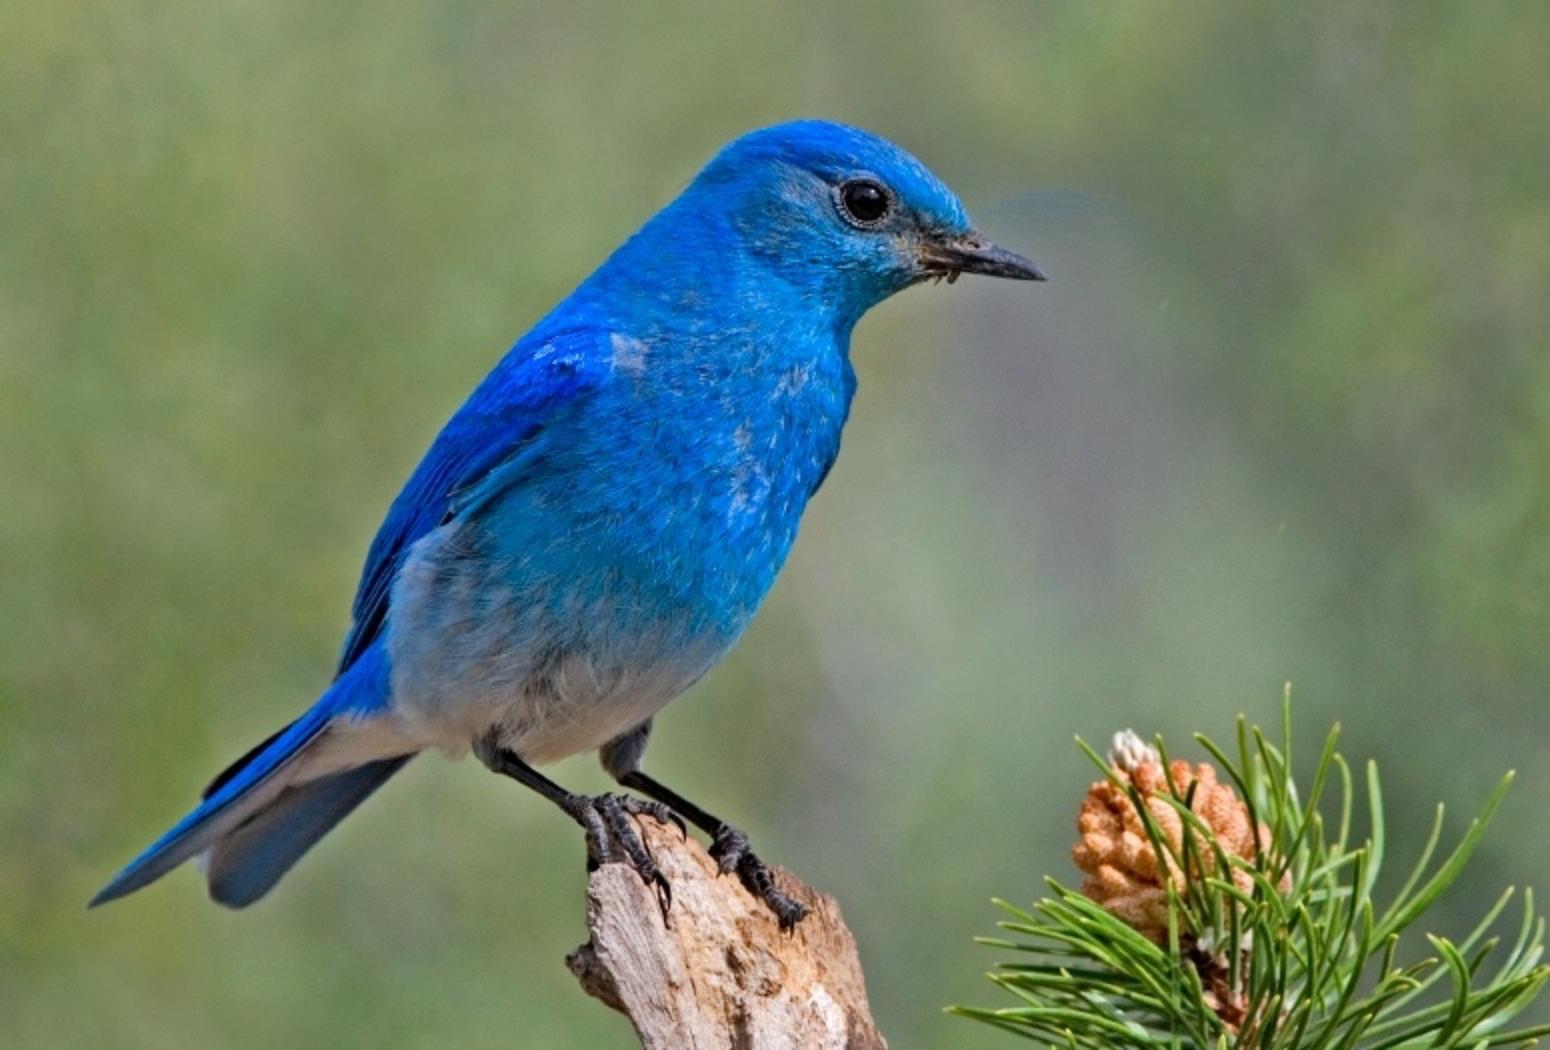 Mountain bluebird.  Image courtesy: Attribution-ShareALike 2.5 as described by Creative Commons